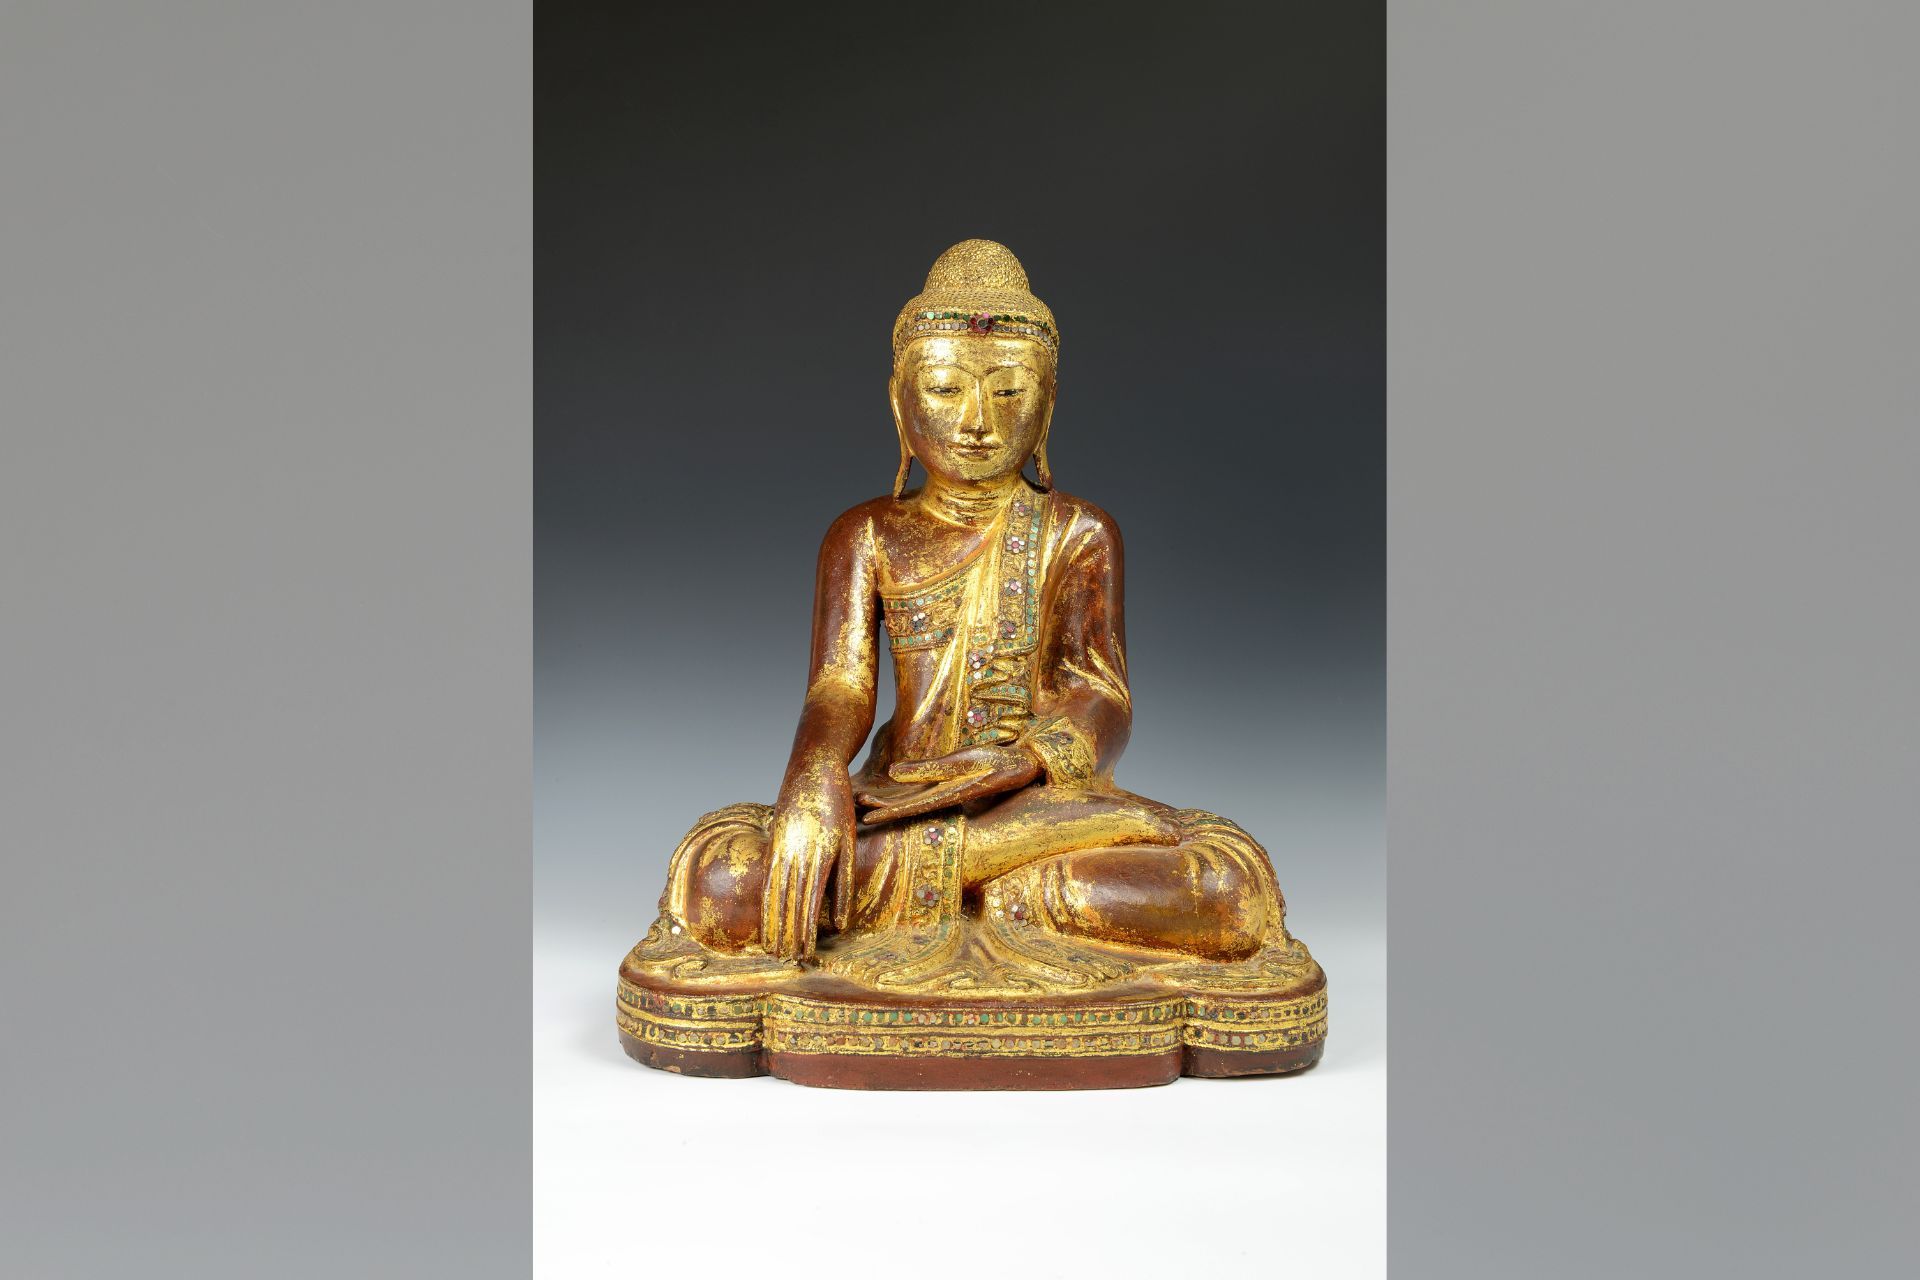 Lacquer figure of the Buddha produced in Myanmar (Burma), 1900-1950